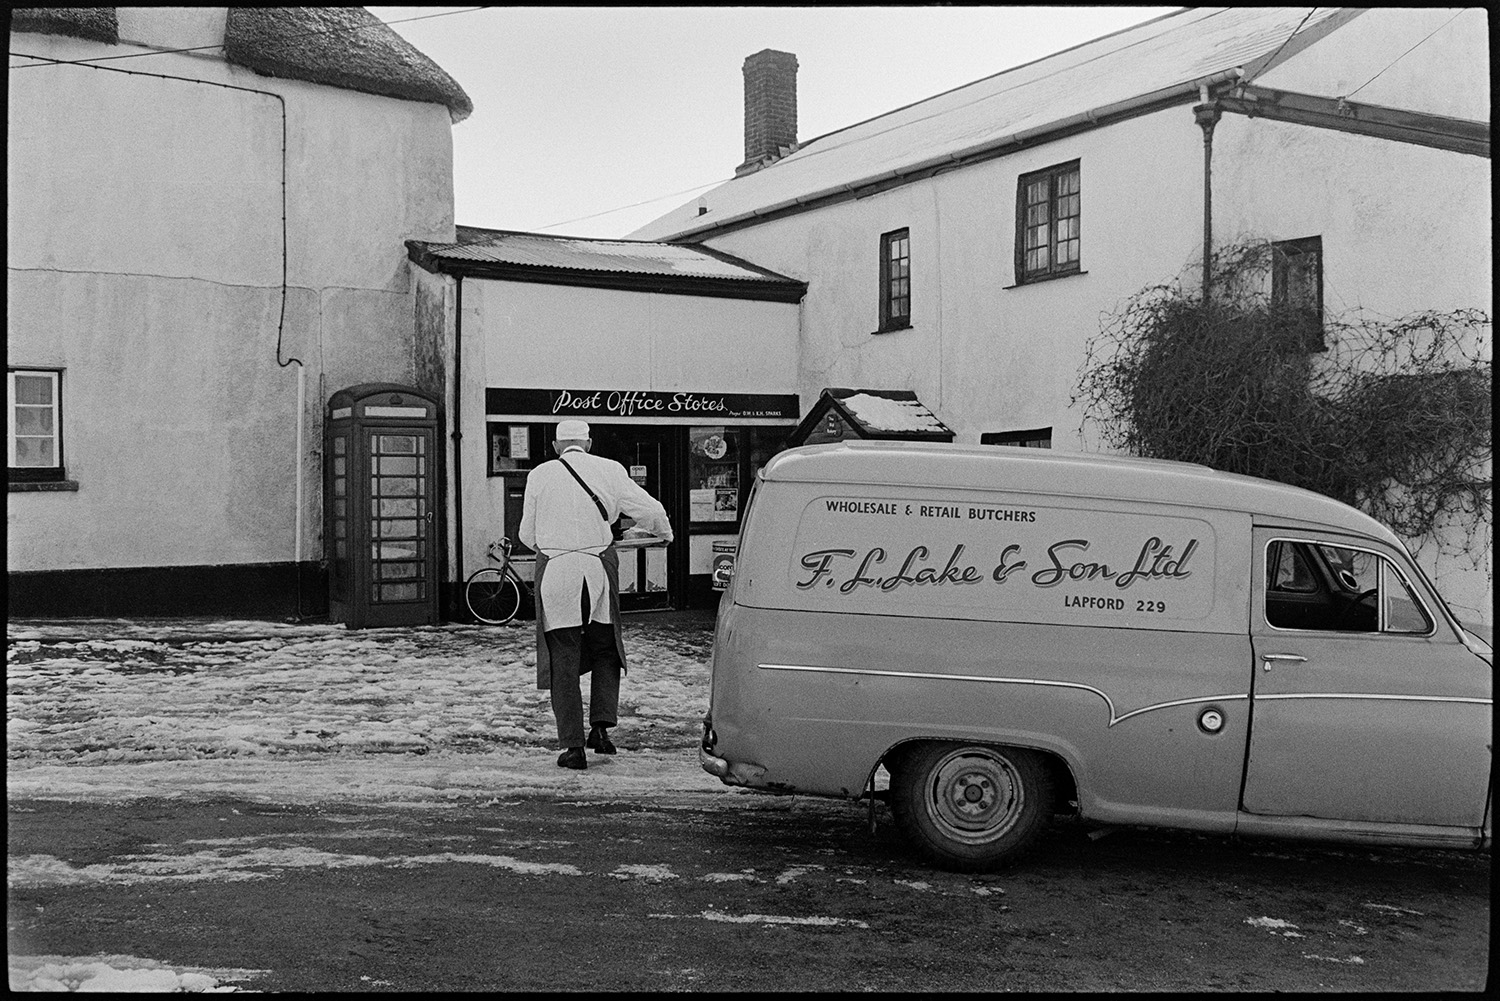 Snow, Butcher delivering meat to Post Office from van. 
[A butcher from F L Lake & Sons Ltd delivering meat to the Post Office in Coldridge. Snow is on the street and a telephone box is next to the Post Office.]